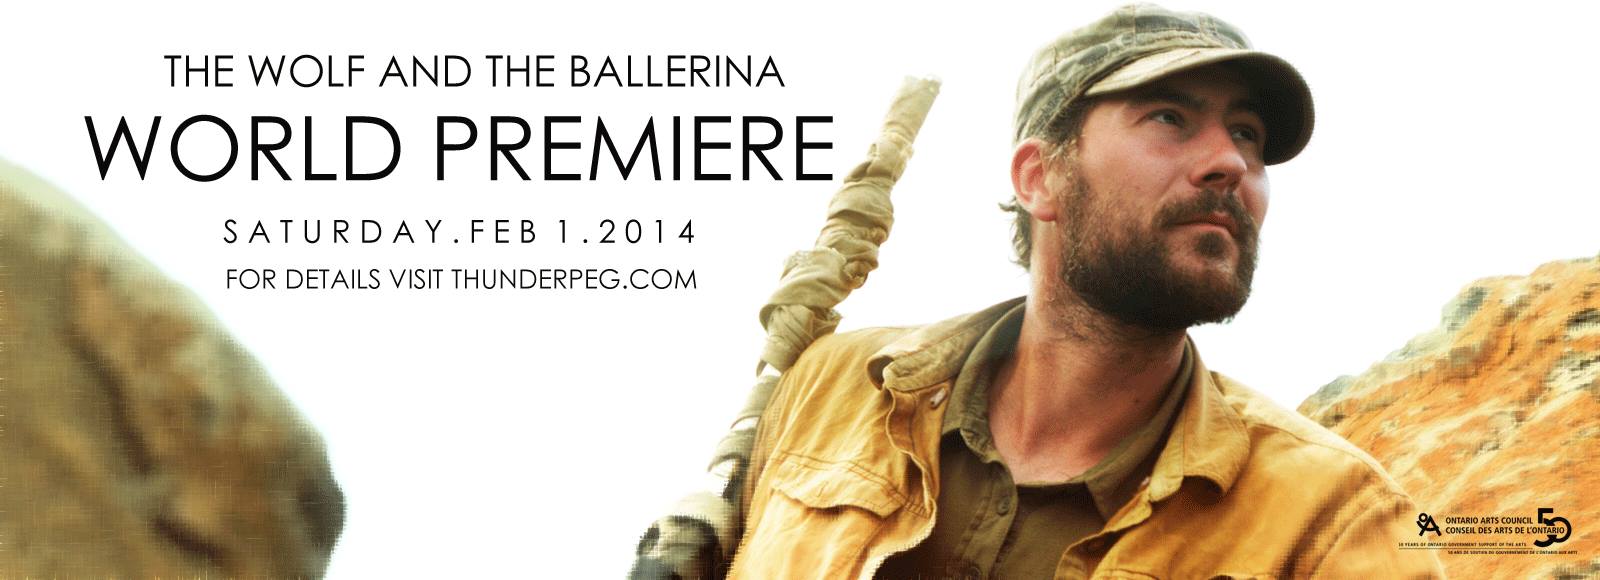 World Premiere of The Wolf and the Ballerina